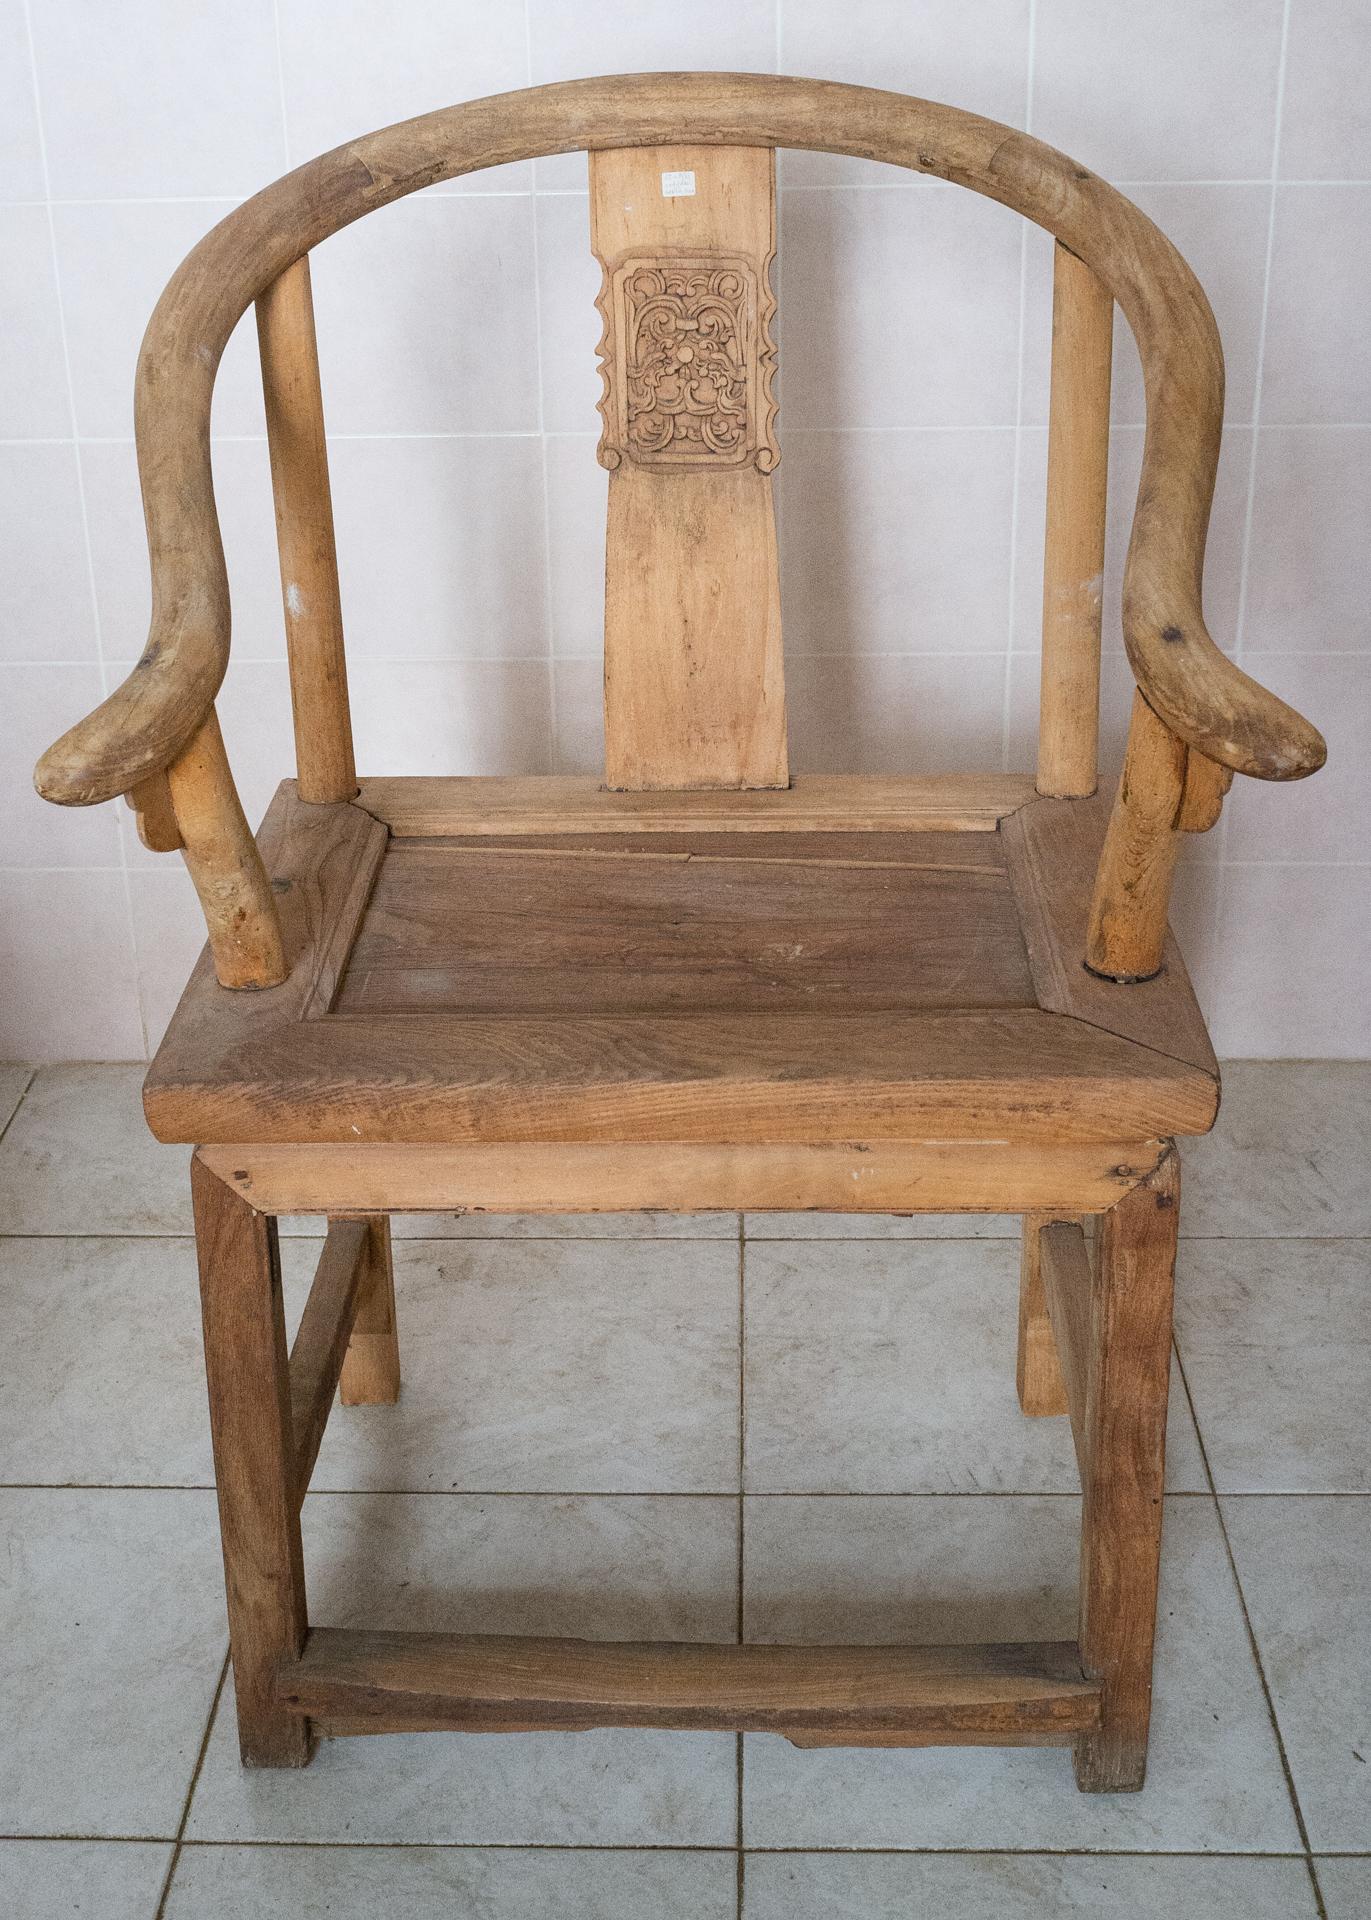 The original finish has been worn away through generations of use, leaving a soft, natural organic feel to the chairs.
Rear legs have a piece added years ago due to wear: but I didn't want to repaint because I find them beautiful, so natural and